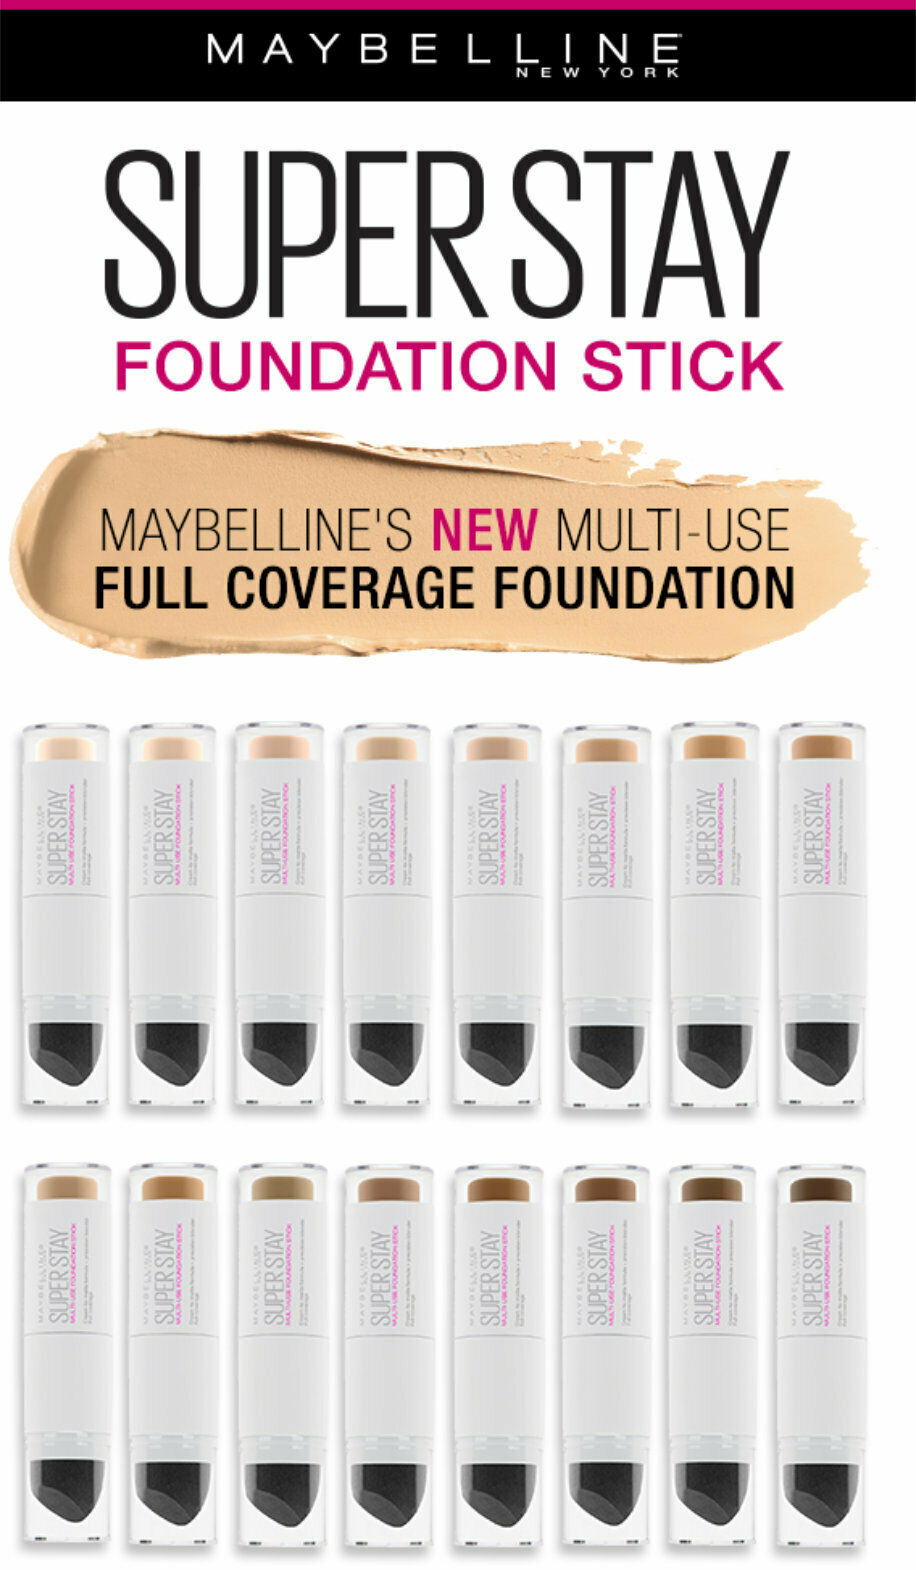 Maybelline superstay multiuse foundation stick U CHOOSE SHADE buy more and SAVE!